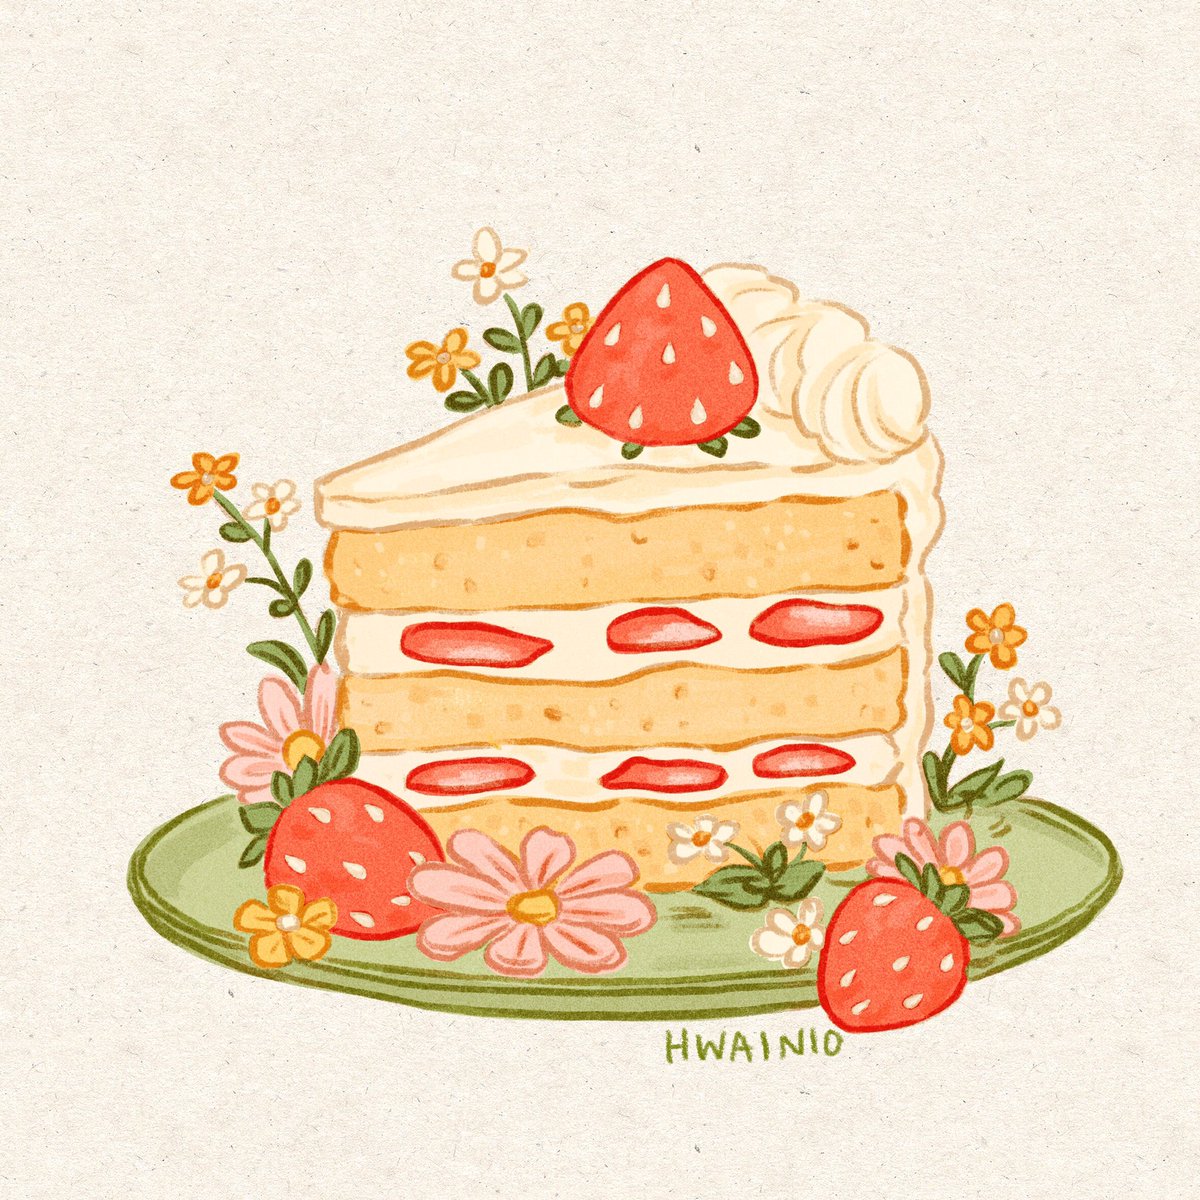 「Remember to eat some cake today!  」|🌿🍄 Hanna 🍄🌿 in Japan!のイラスト